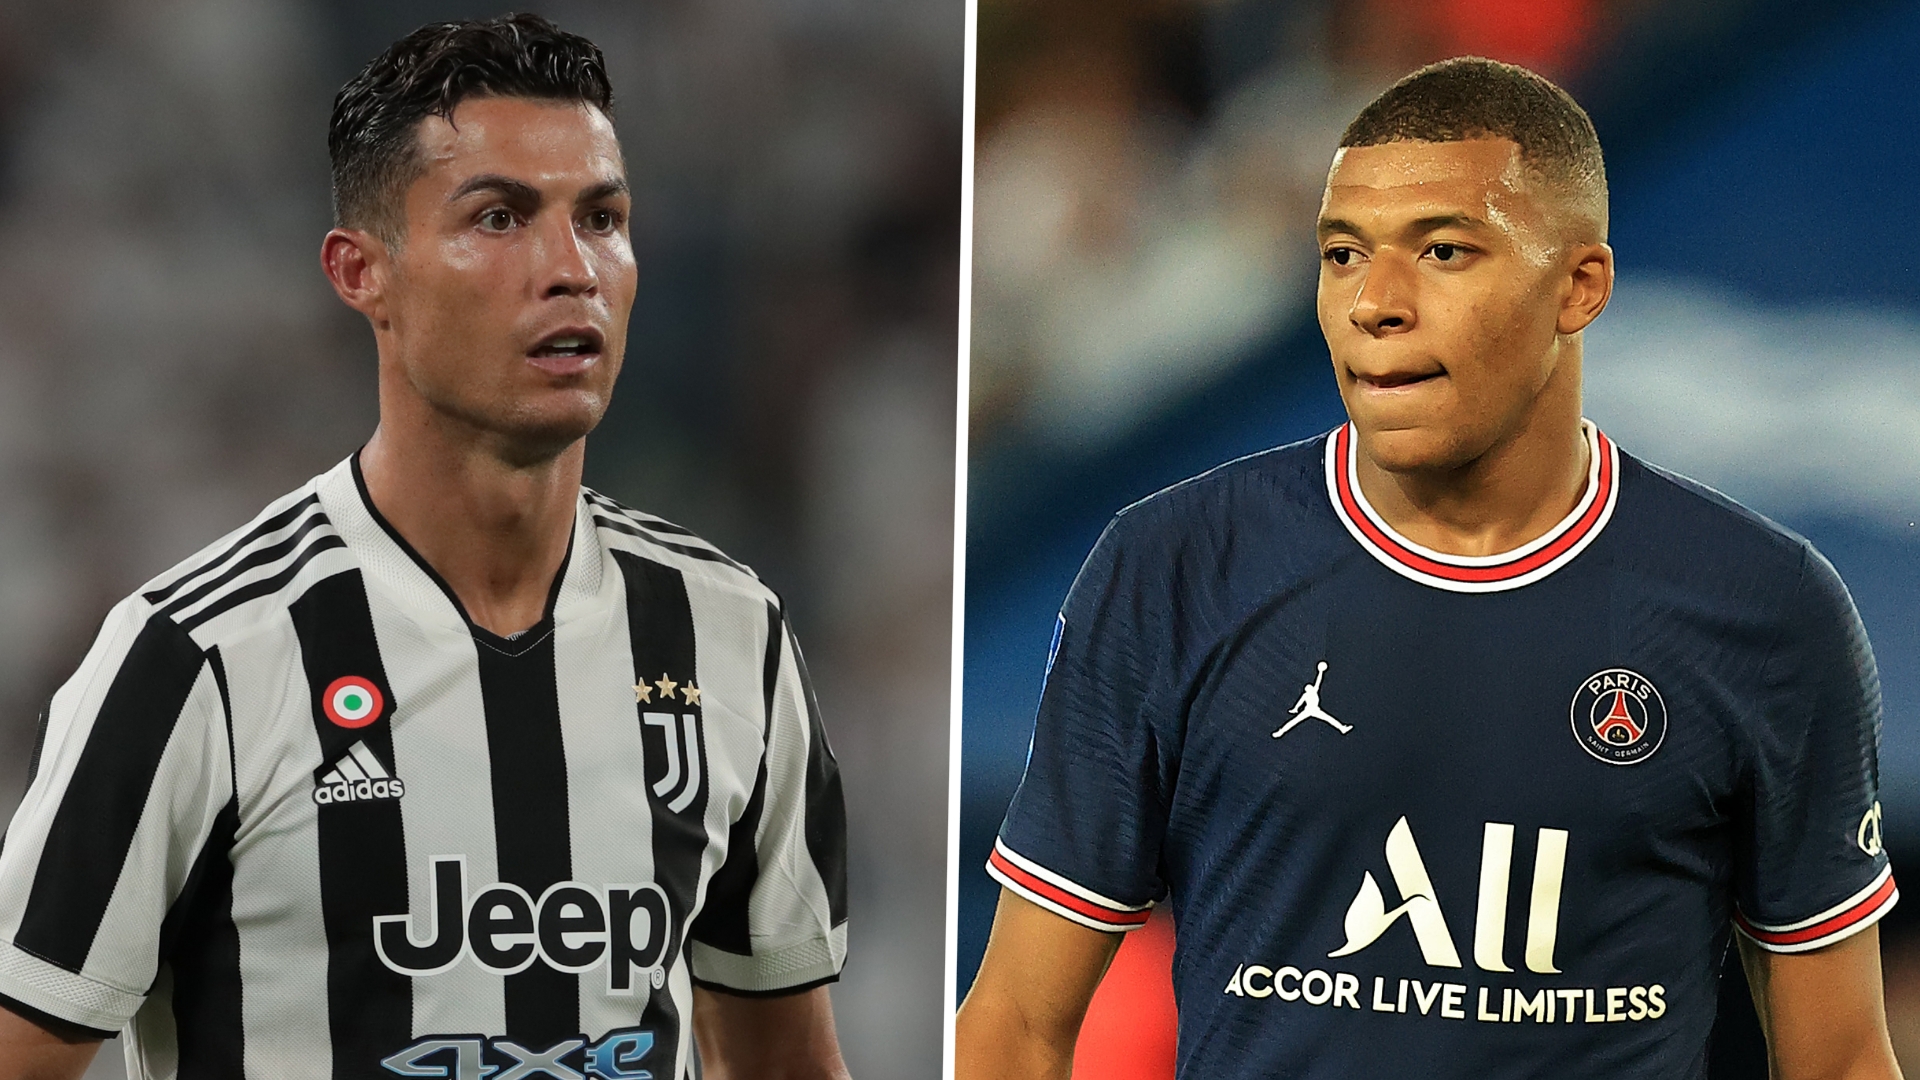 ‘Cristiano is a perfectionist’ – Carvalho explains why Ronaldo & Mbappe are so successful